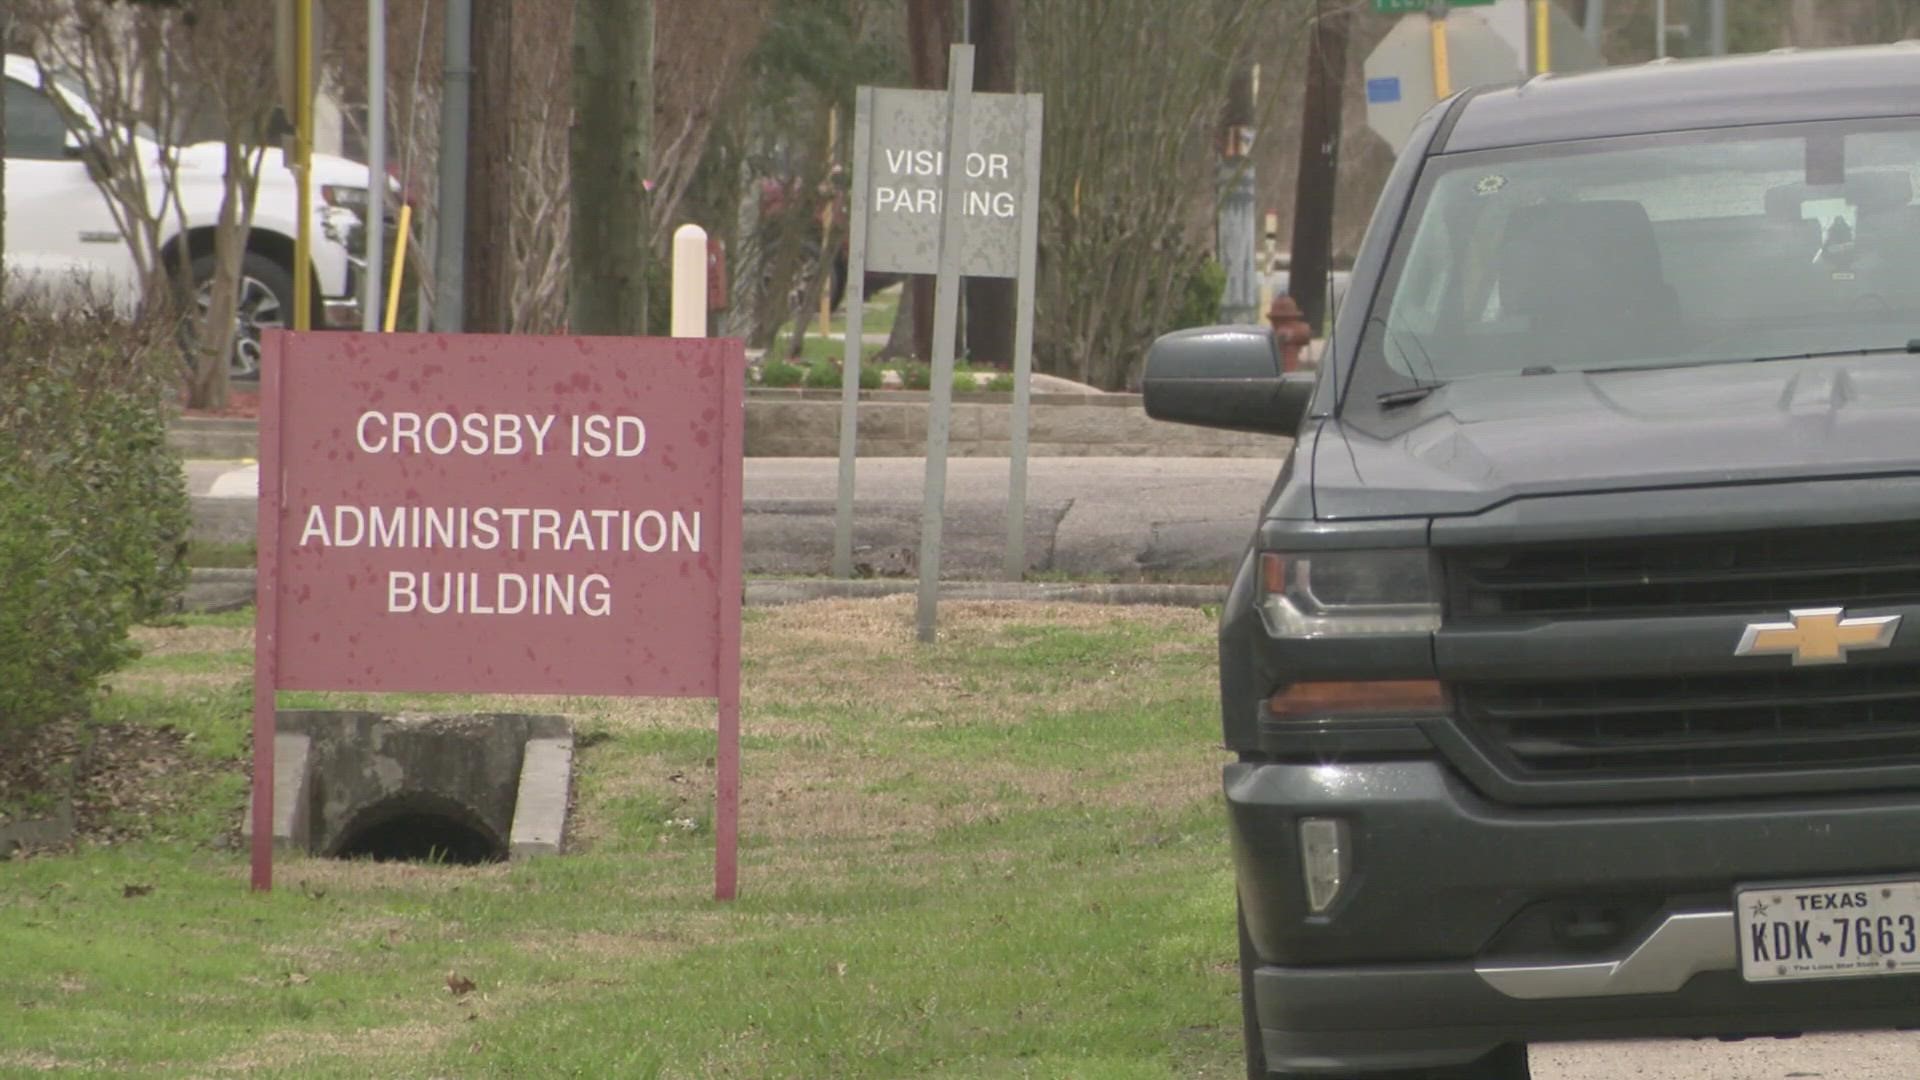 About 40 Texas school districts have switched to a four-day school week. Crosby ISD would be the first in Harris County if the changes are approved.